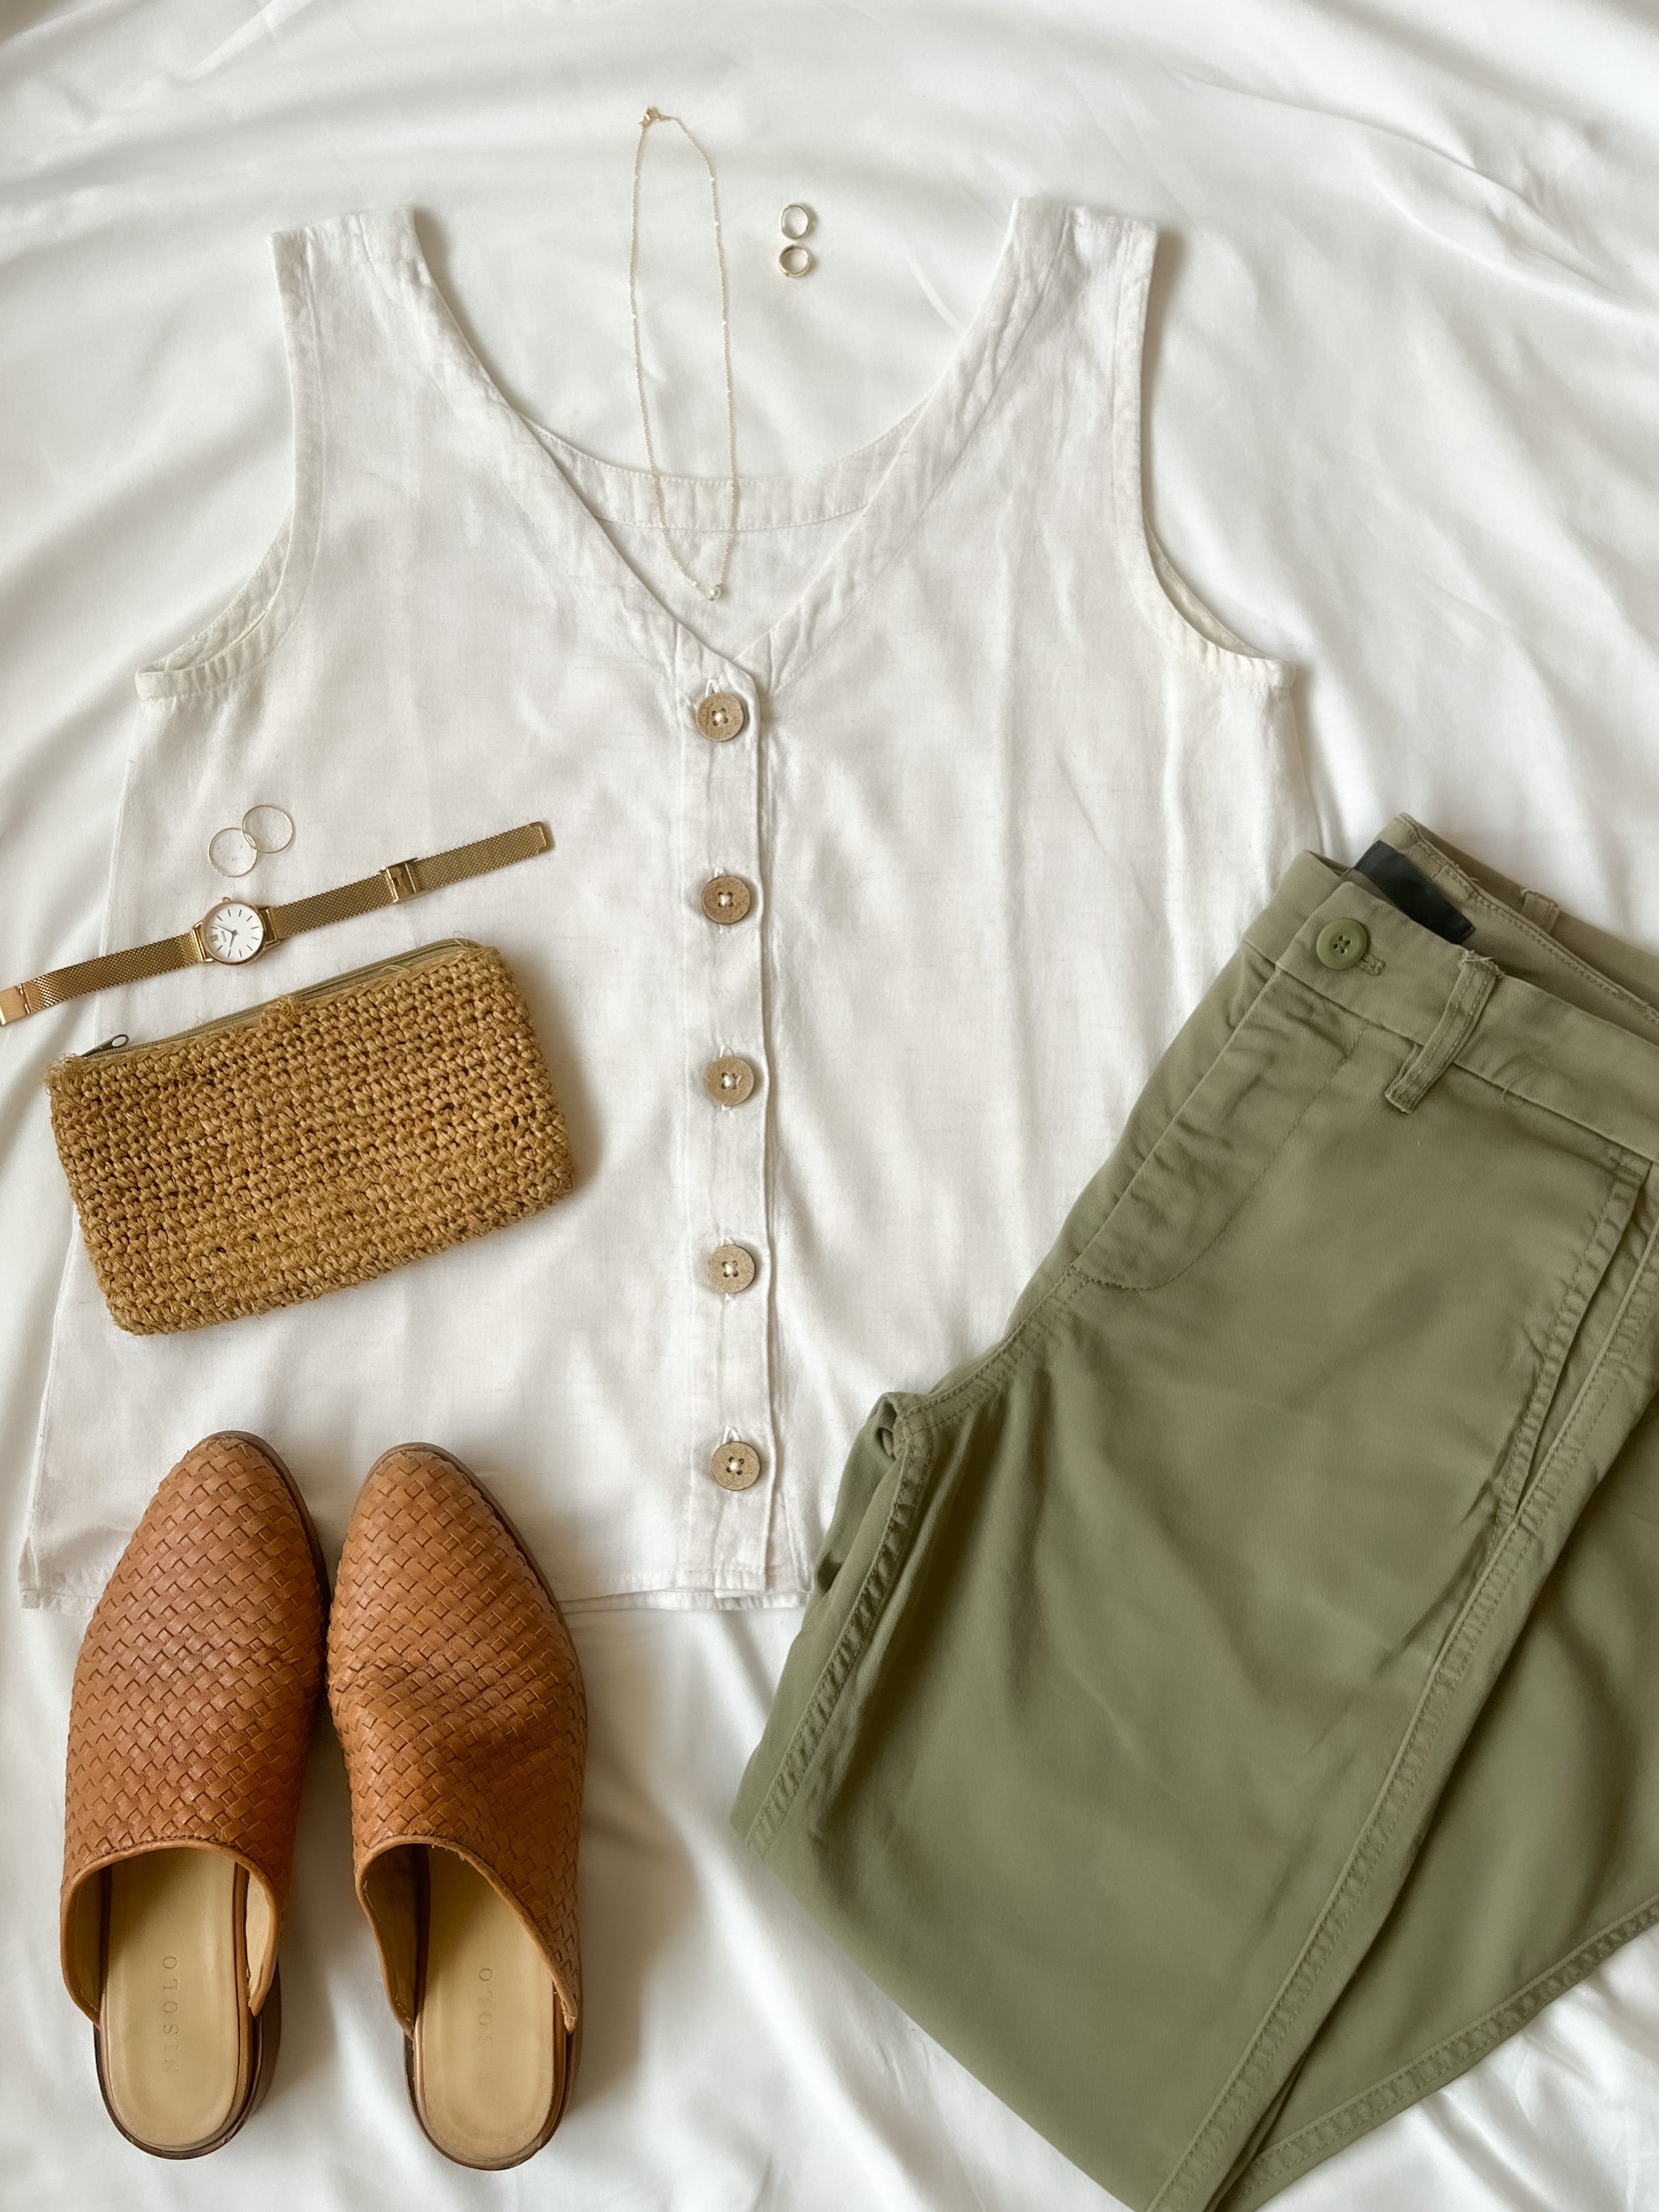 Neutral colors flatlay of Swahlee's Sleeveless Reversible Top